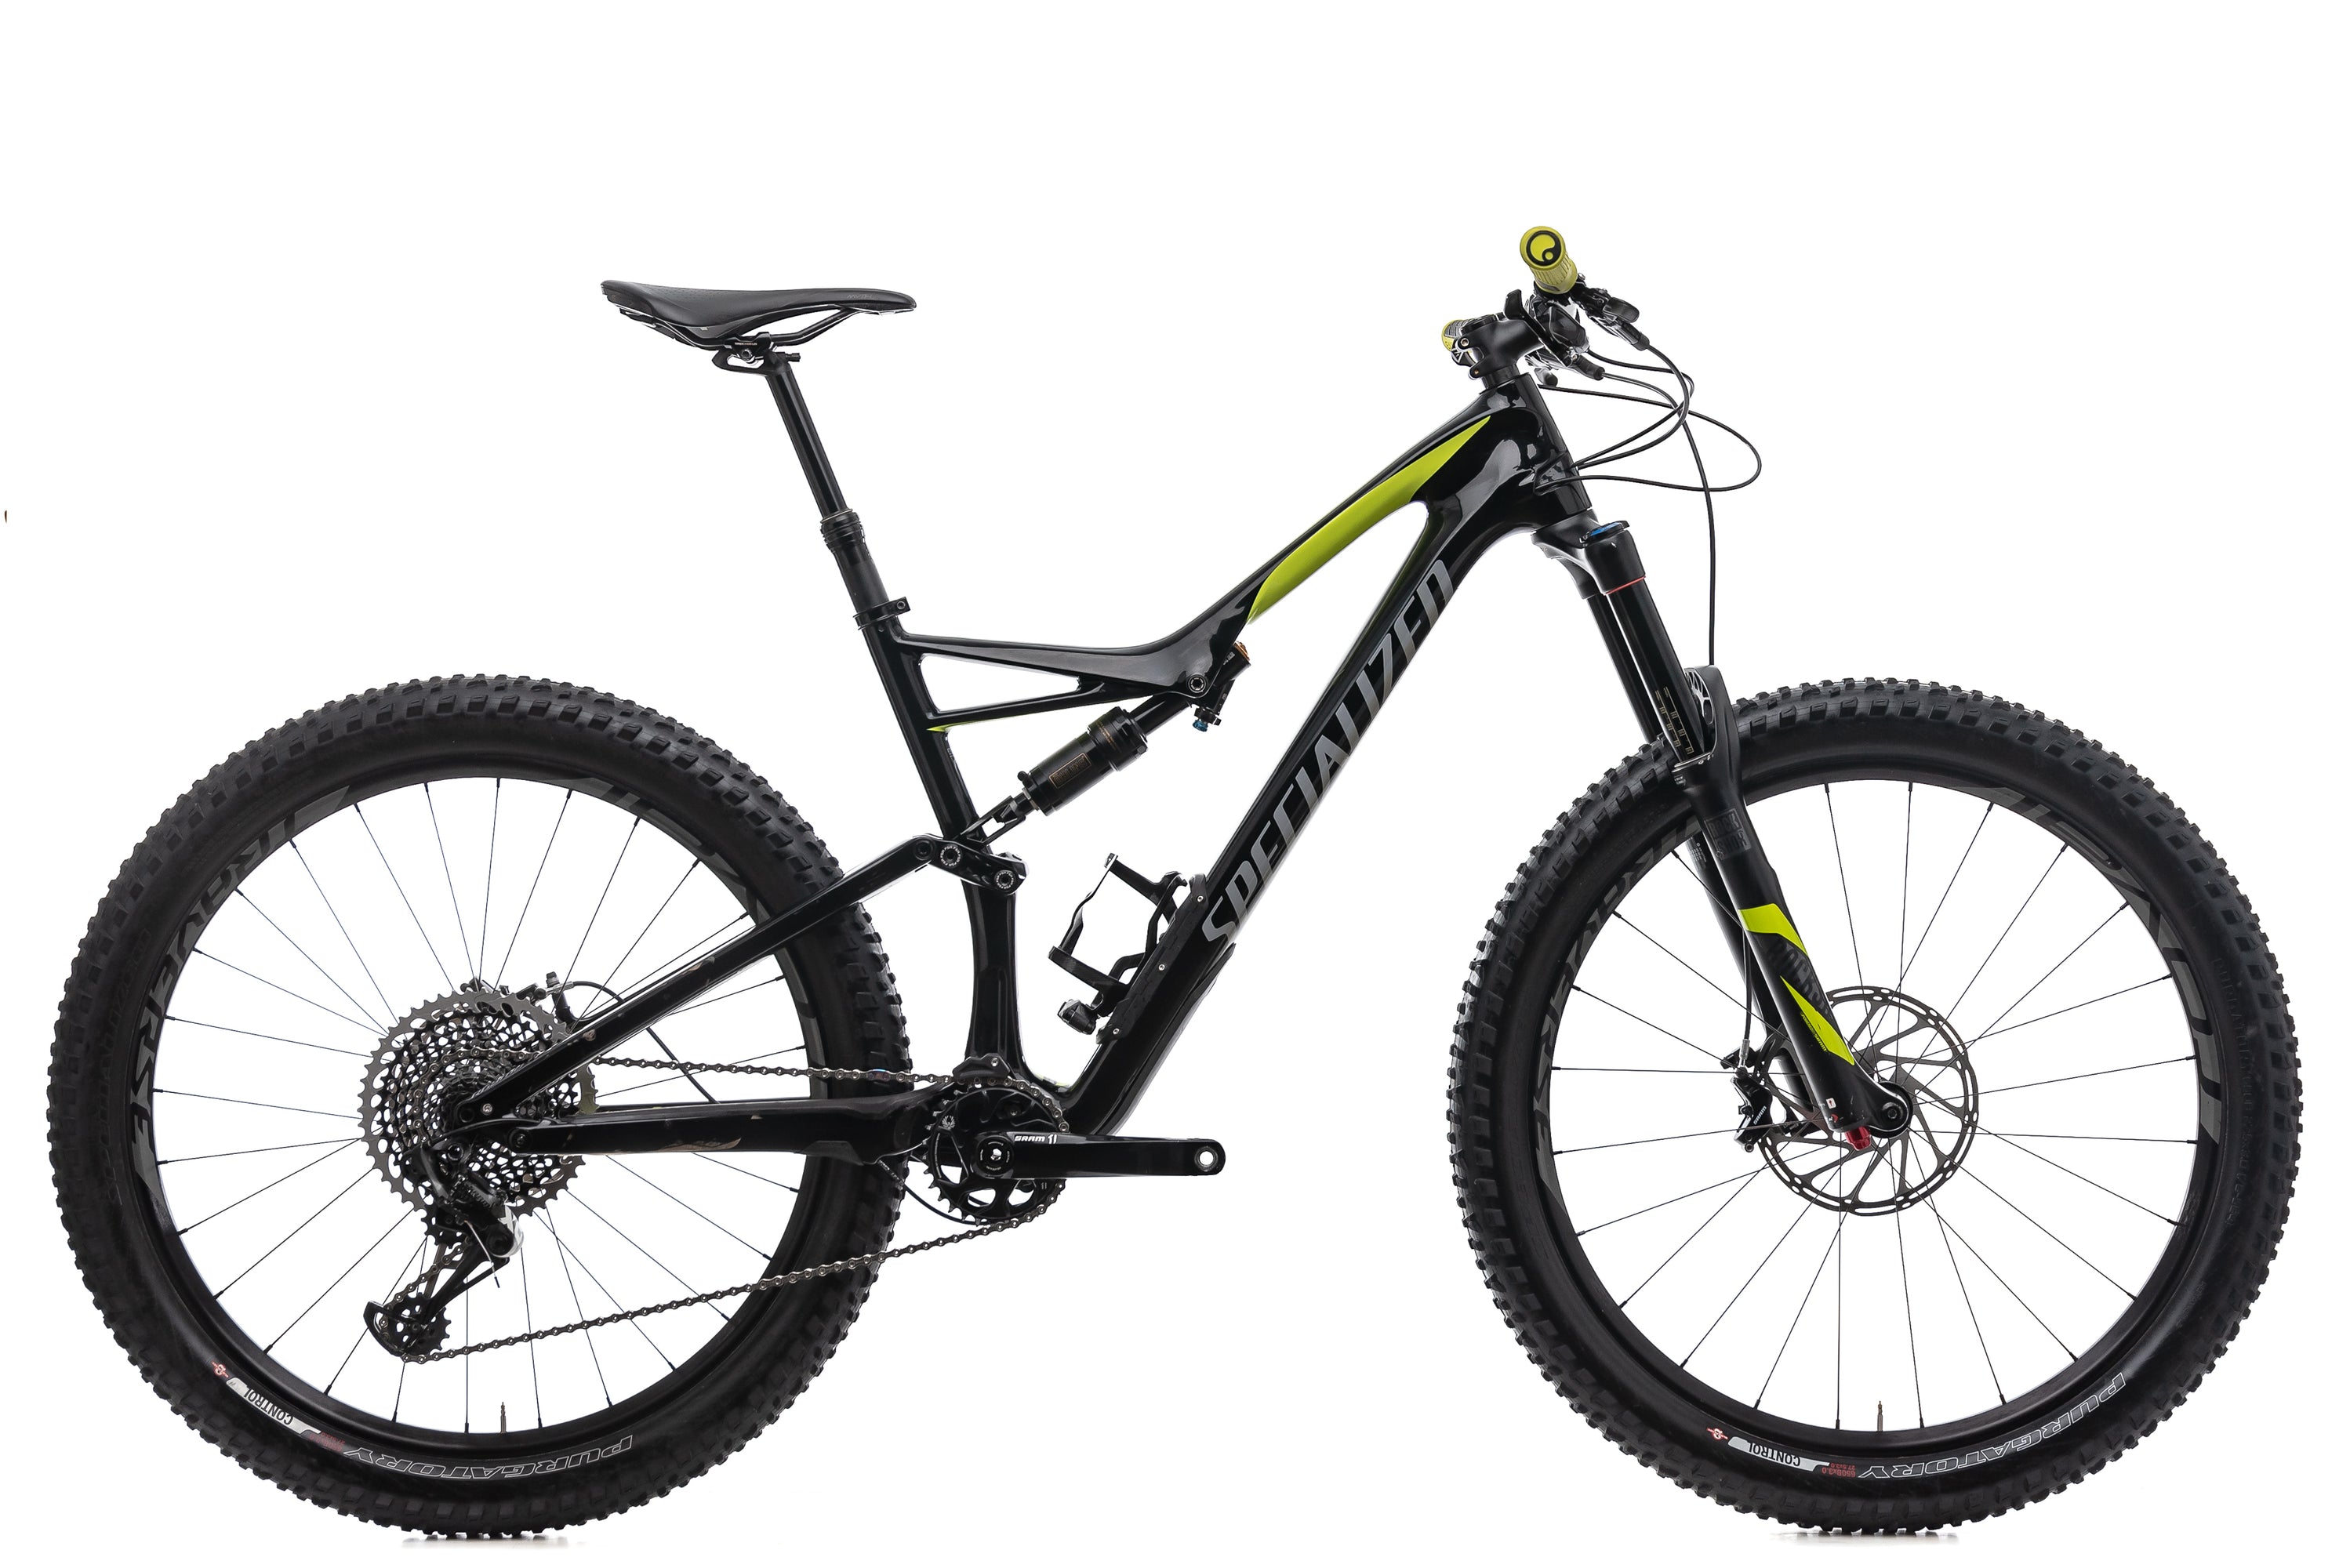 Specialized Camber Comp 29 Large Bike - 2014 drive side